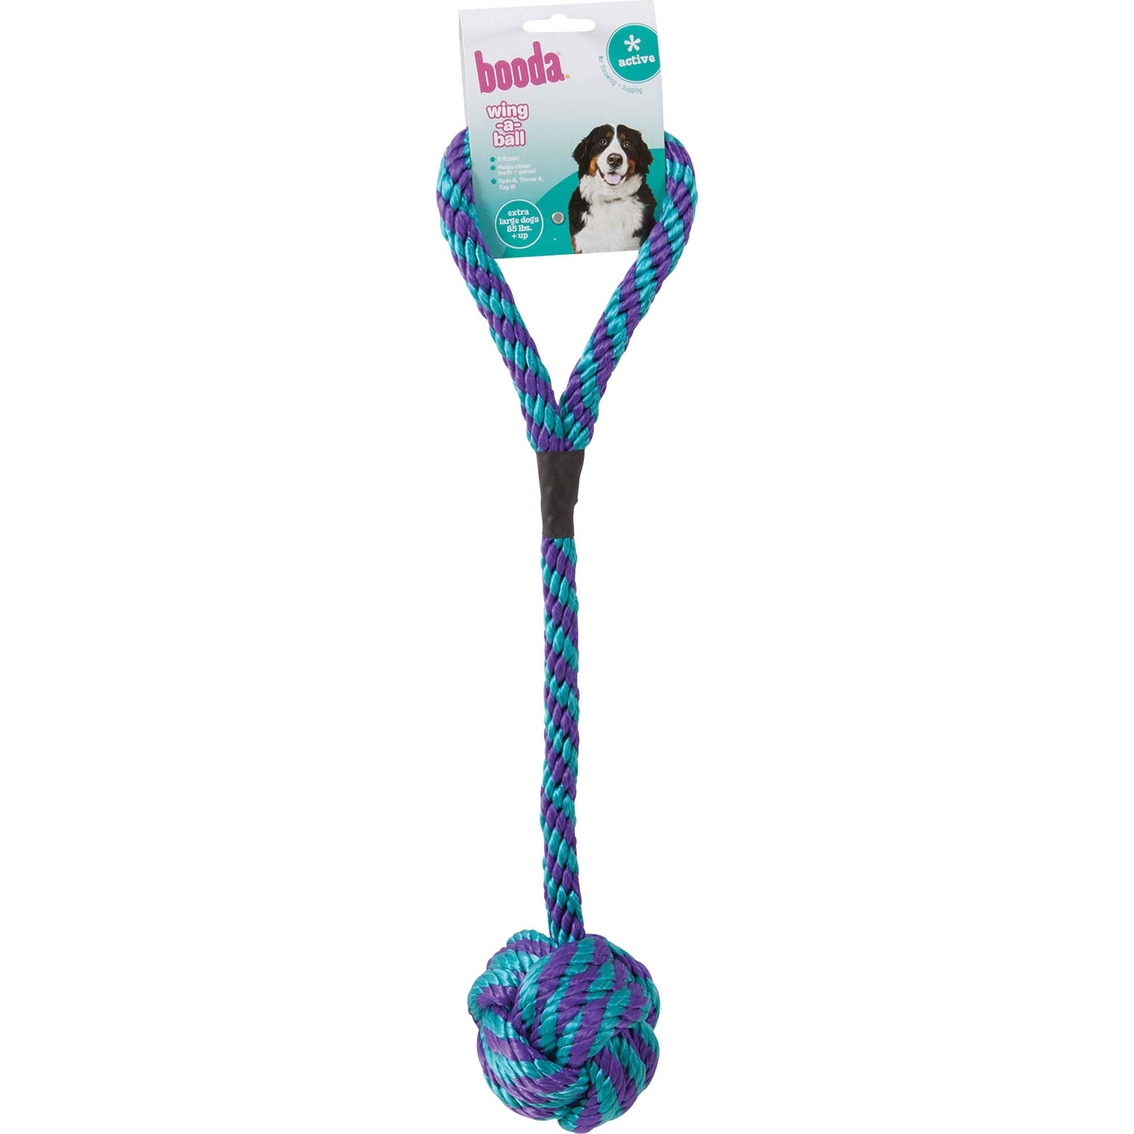 Petmate Booda Wing a Ball Dog Toy, Large - Image 2 of 2